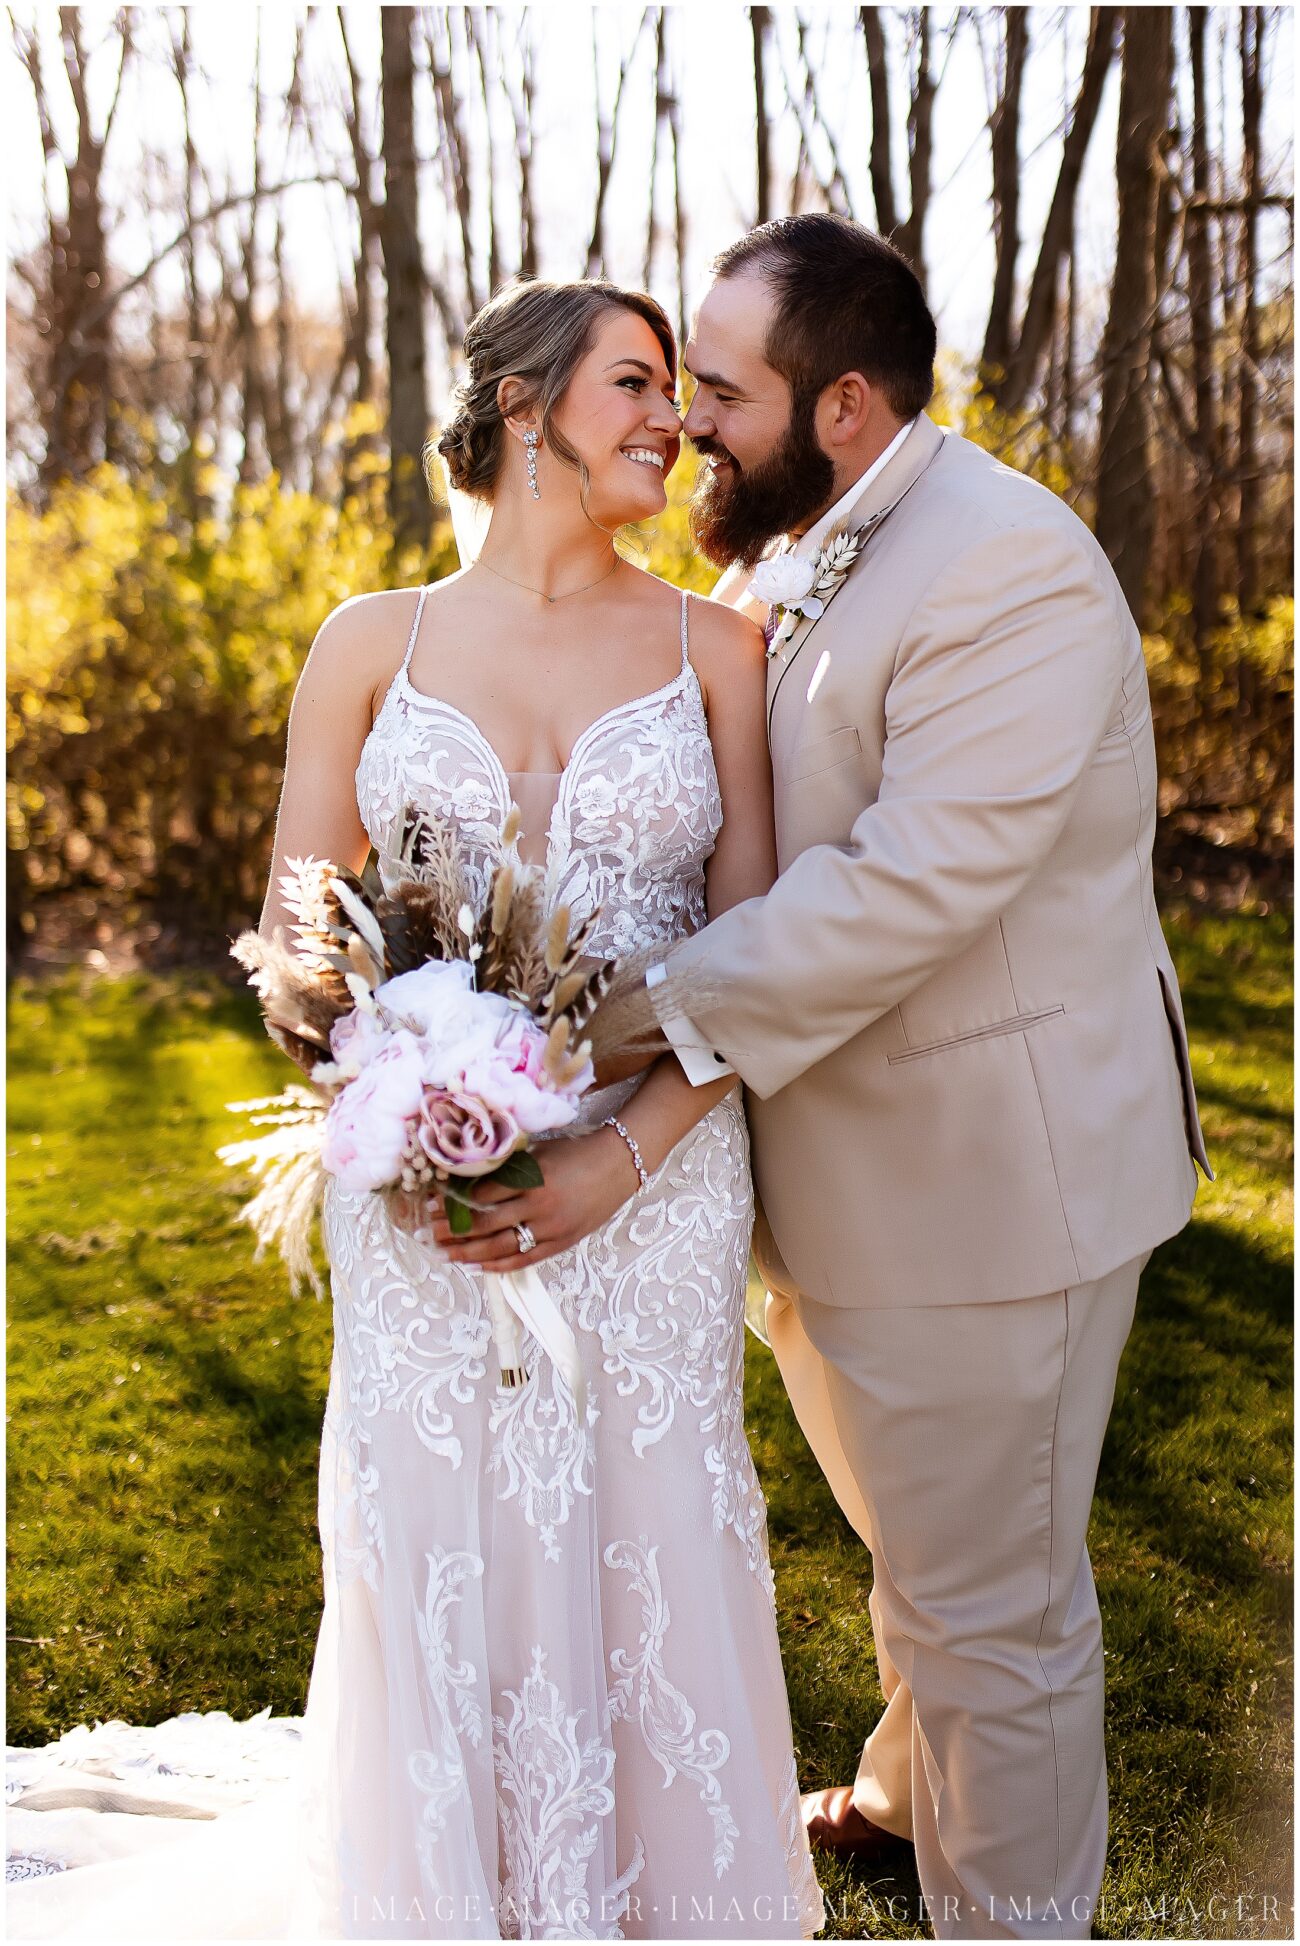 A small town wedding for Casey and Adam. A close up portrait of Casey and Adam outdoors in front of some green trees.

Saint John the Baptist Catholic Church, L'erable, IL. 

Photo taken by Mager Image Photography.